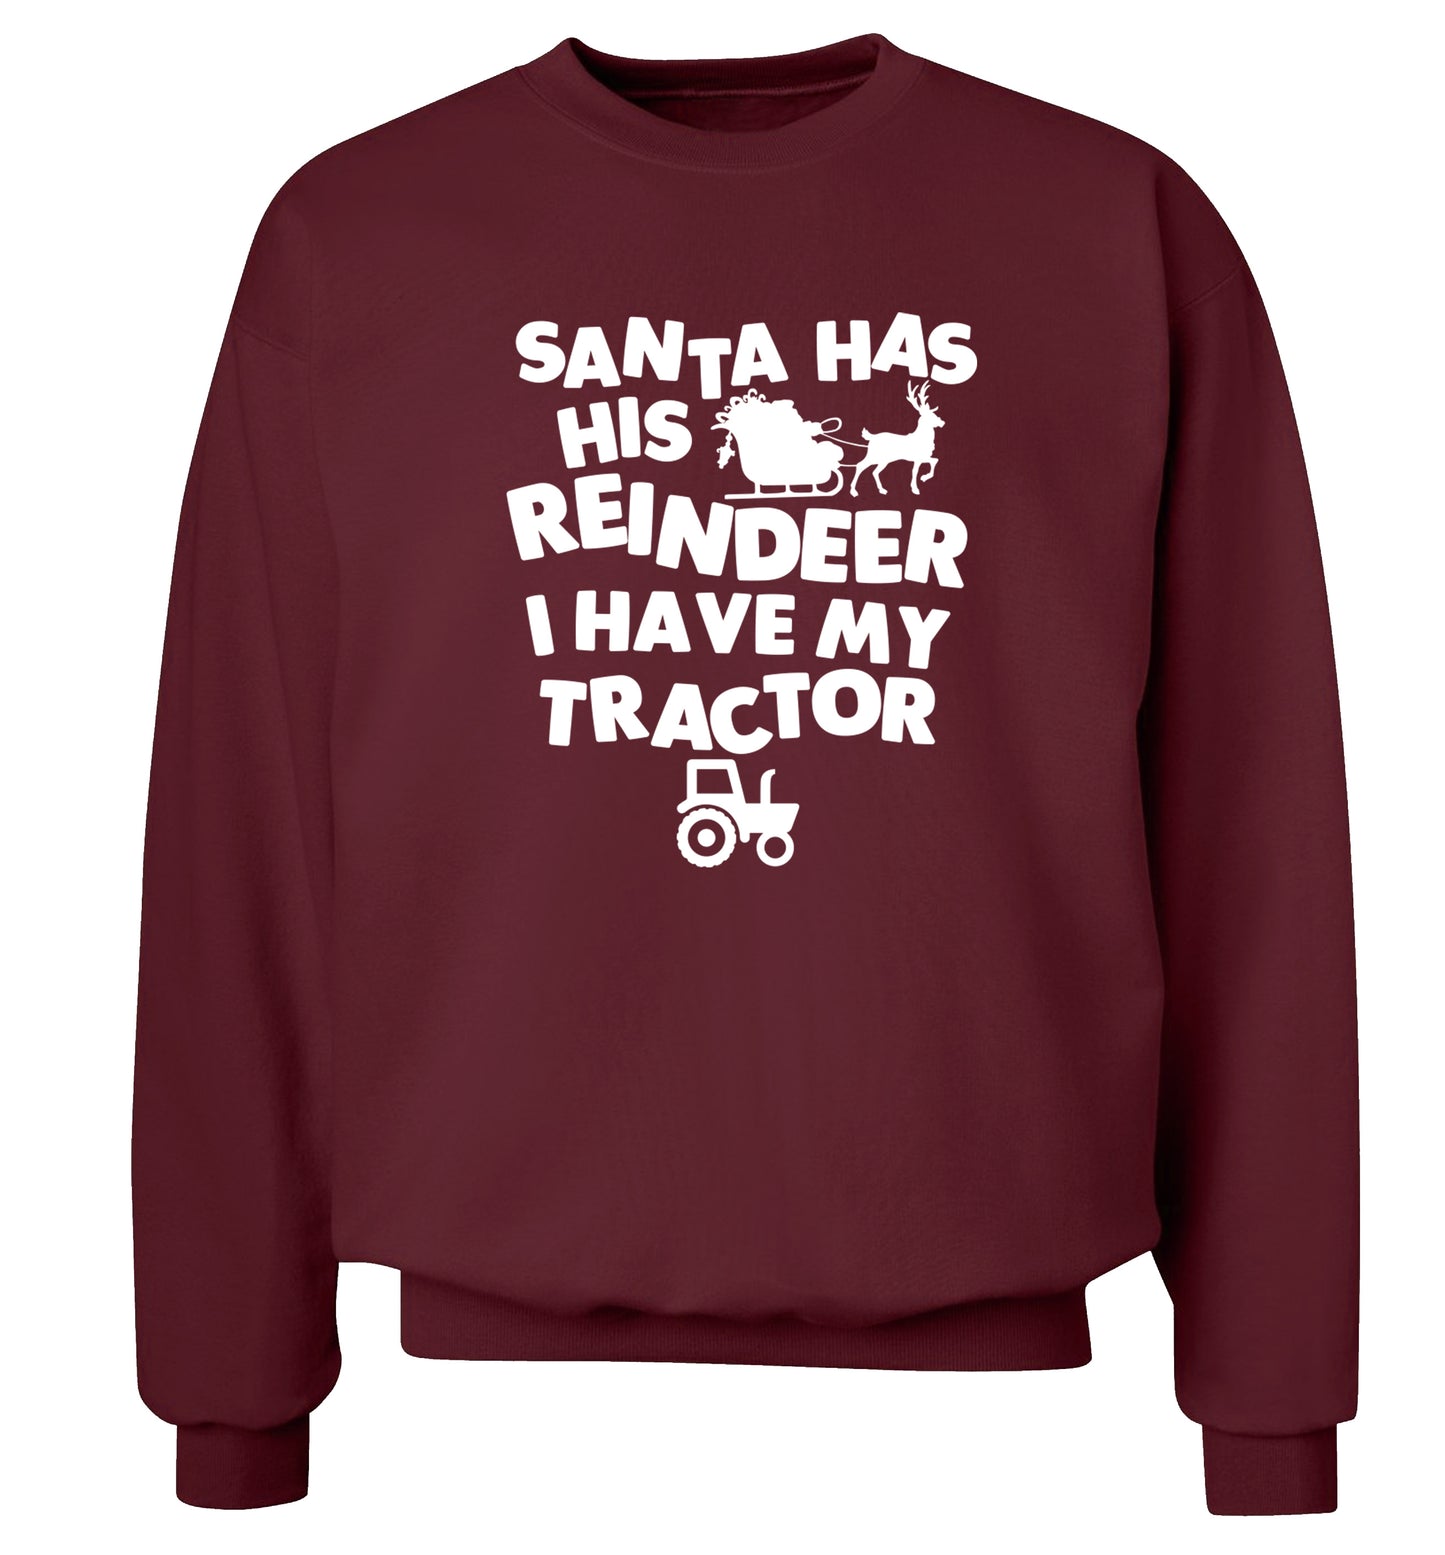 Santa has his reindeer I have my tractor Adult's unisex maroon Sweater 2XL